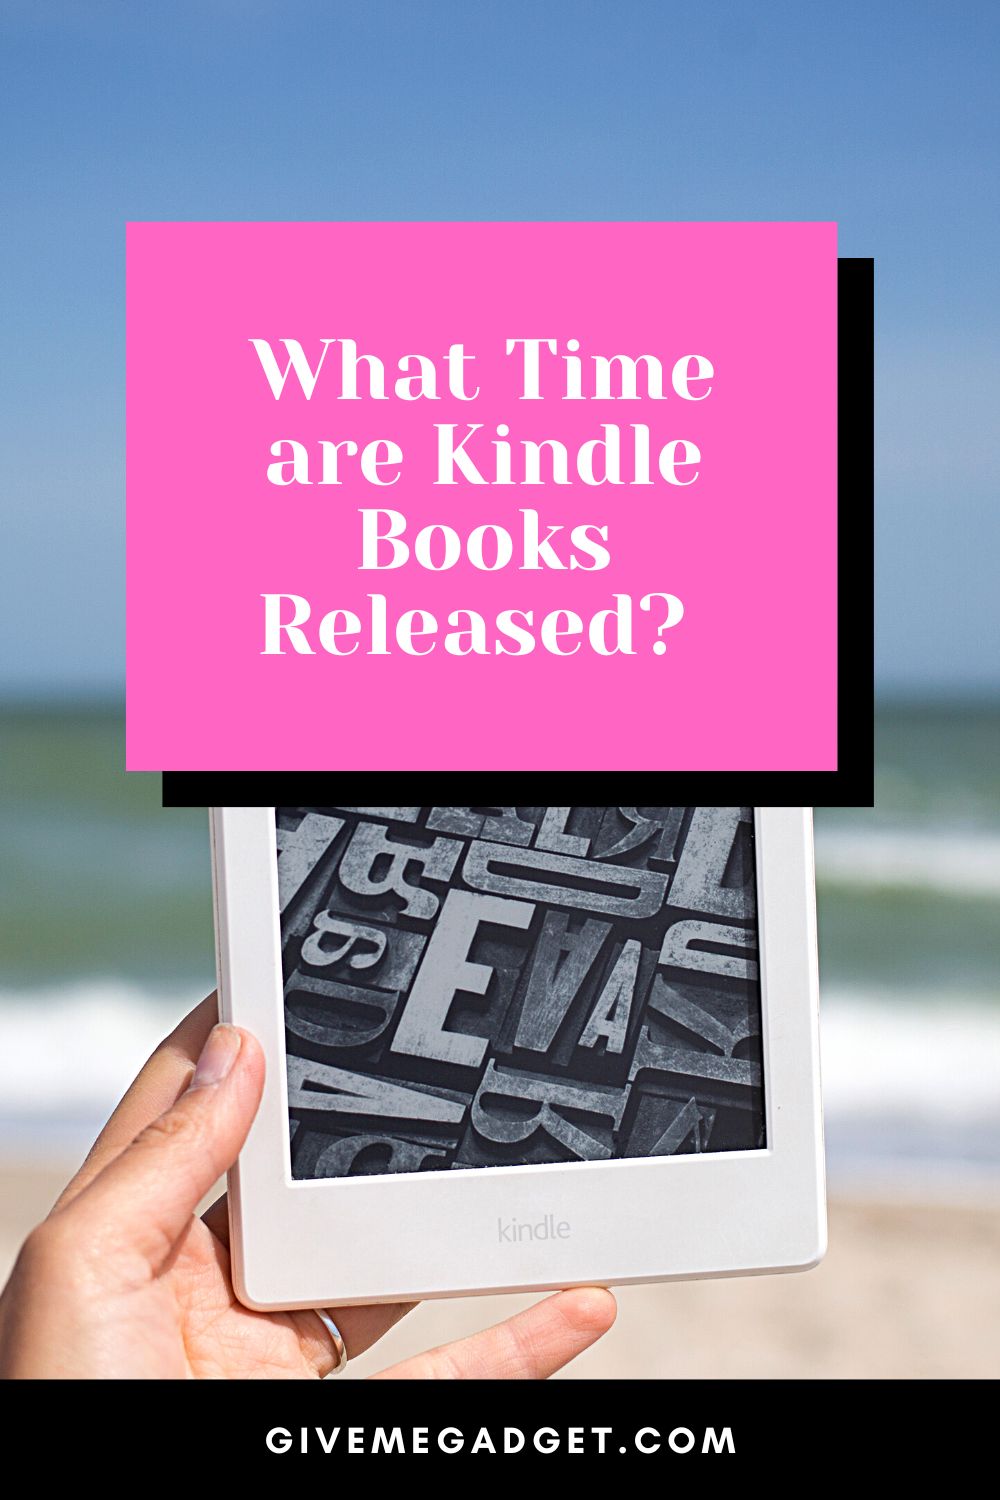 What Time are Kindle Books Released?